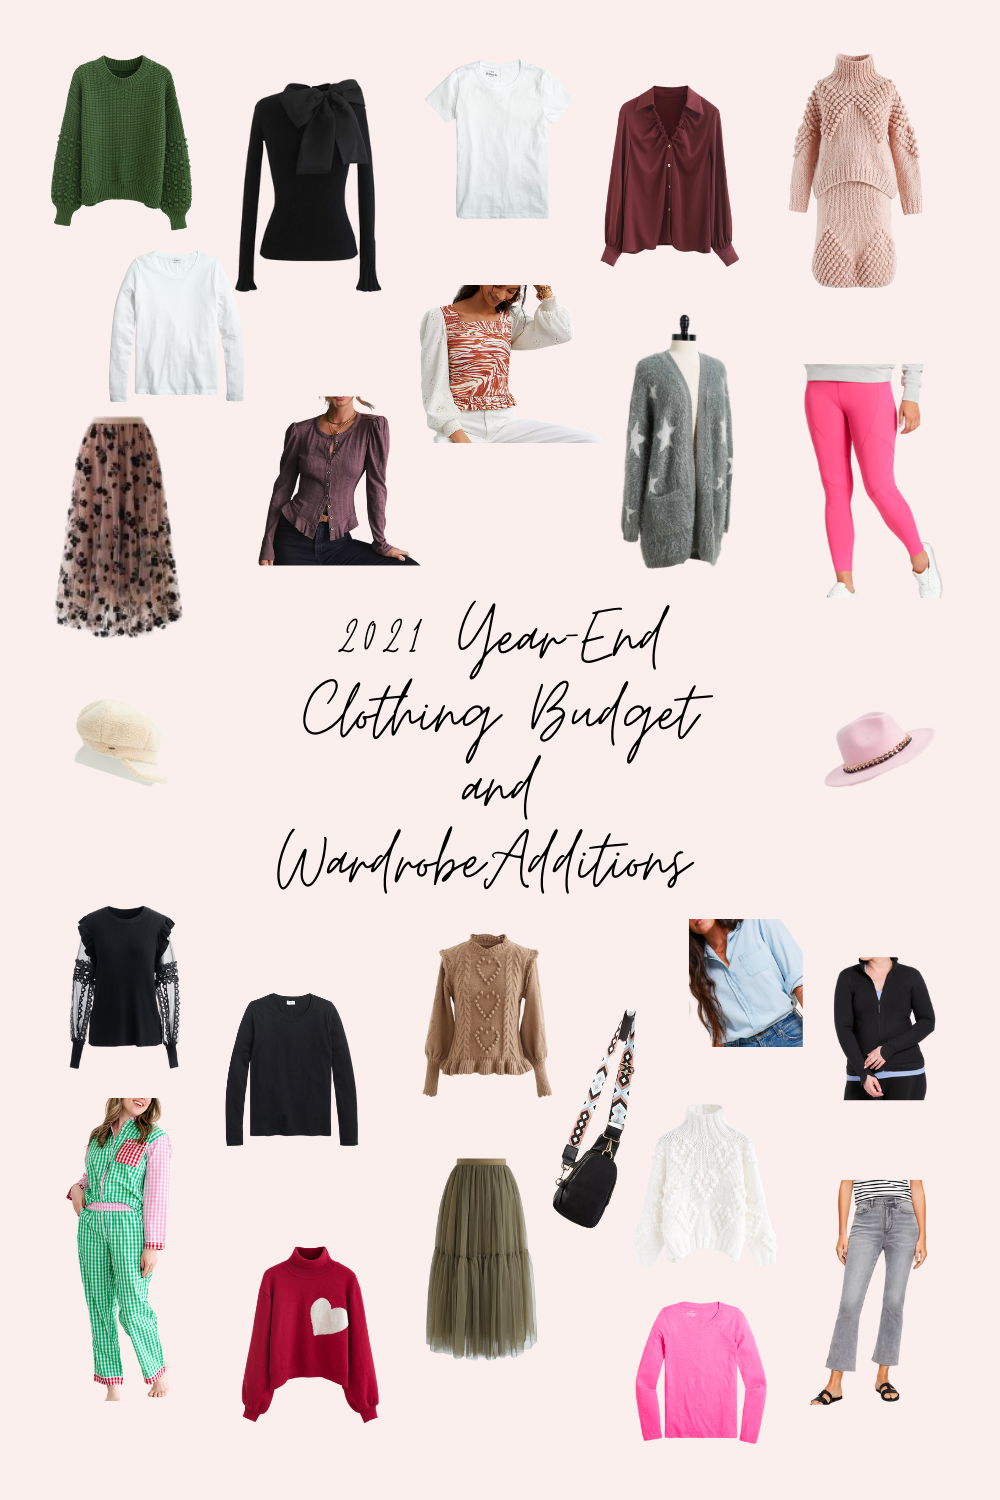 Clothing Budget and Wardrobe Additions